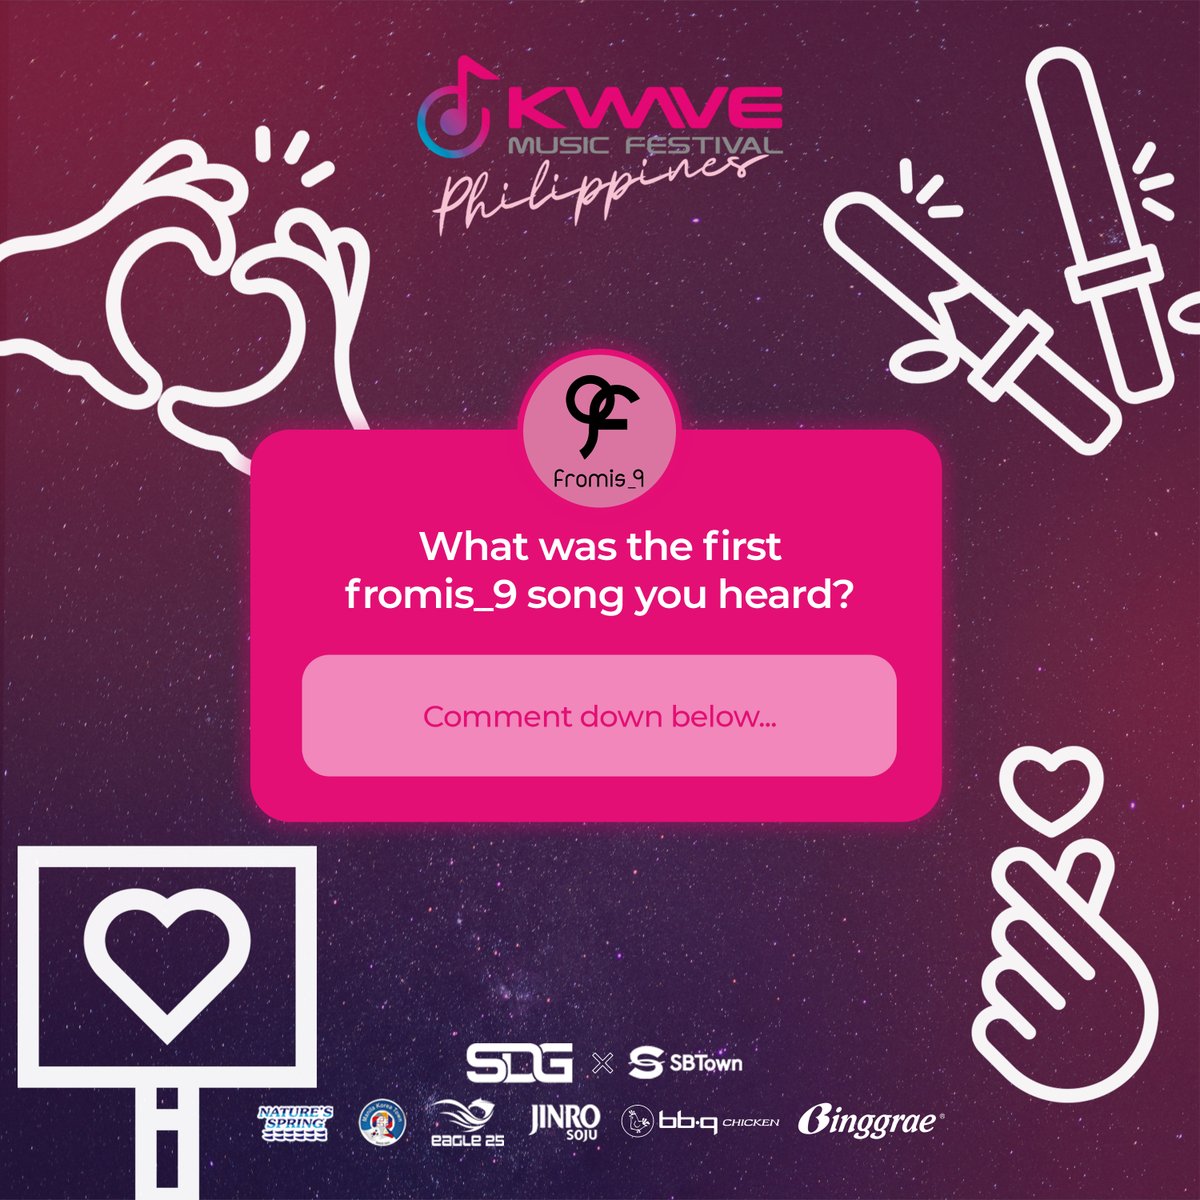 KWAVERS! Get ready for a wave of firsts!

Drop the first @realfromis_9 song that made your heart go boom boom below and manifest to hear them LlVE for the first time this May 11! 🎶

#fromis_9 #KWAVEPH #AbsolutelyLibre #KWAVEMusicFestival #BadmintonAsia #KWAVE